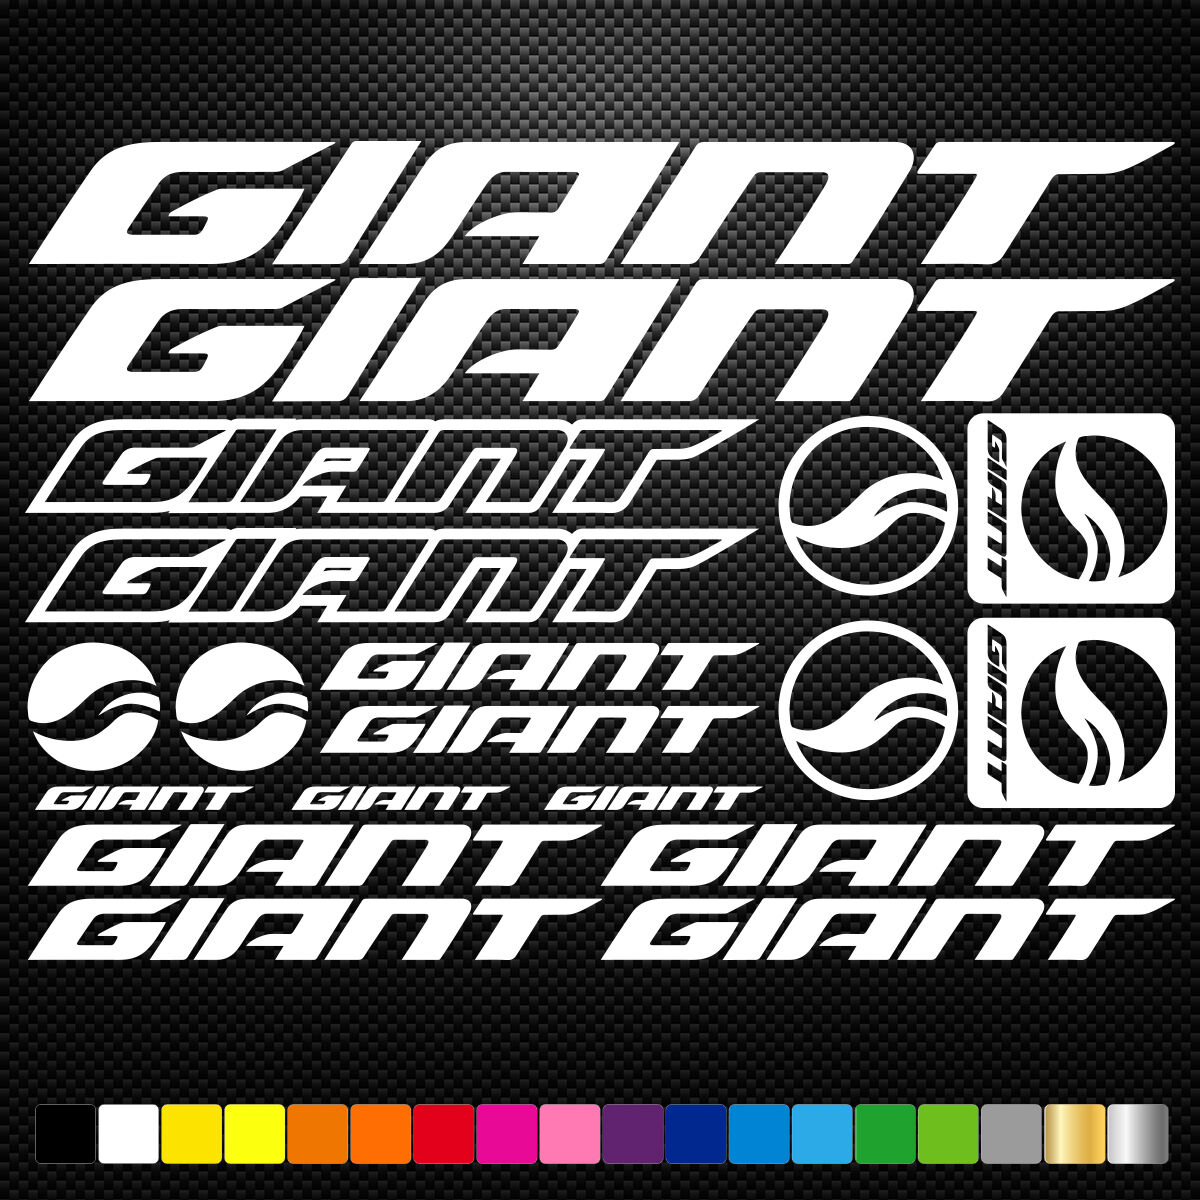 FITS Giant Vinyl Stickers Sheet Bike Frame Cycle Cycling Bicycle Mtb Road